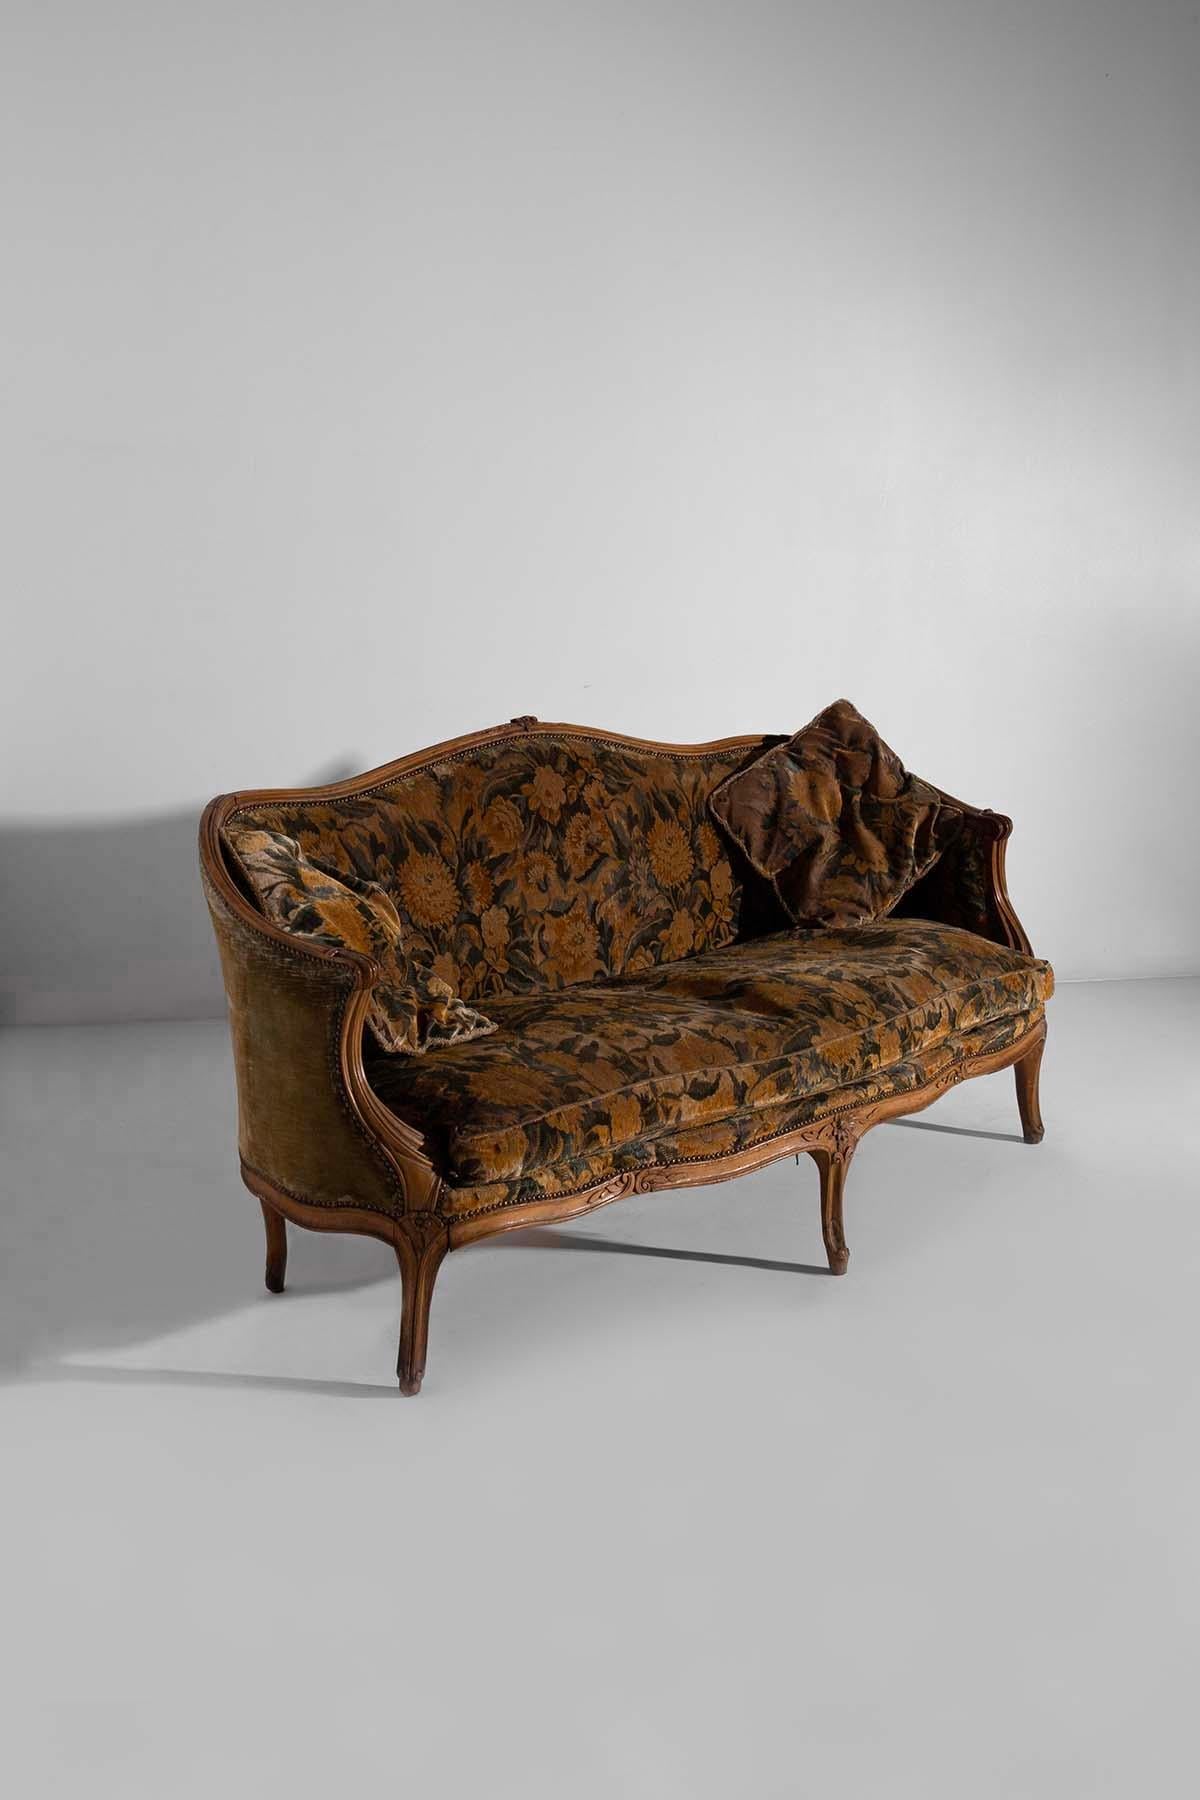 Discover the charm of this early 20th-century sofa with Italian floral fabric. Every detail of this sofa, from the meticulously crafted wood carvings to the vintage fabric, reflects Italian artistry and craftsmanship at its finest.